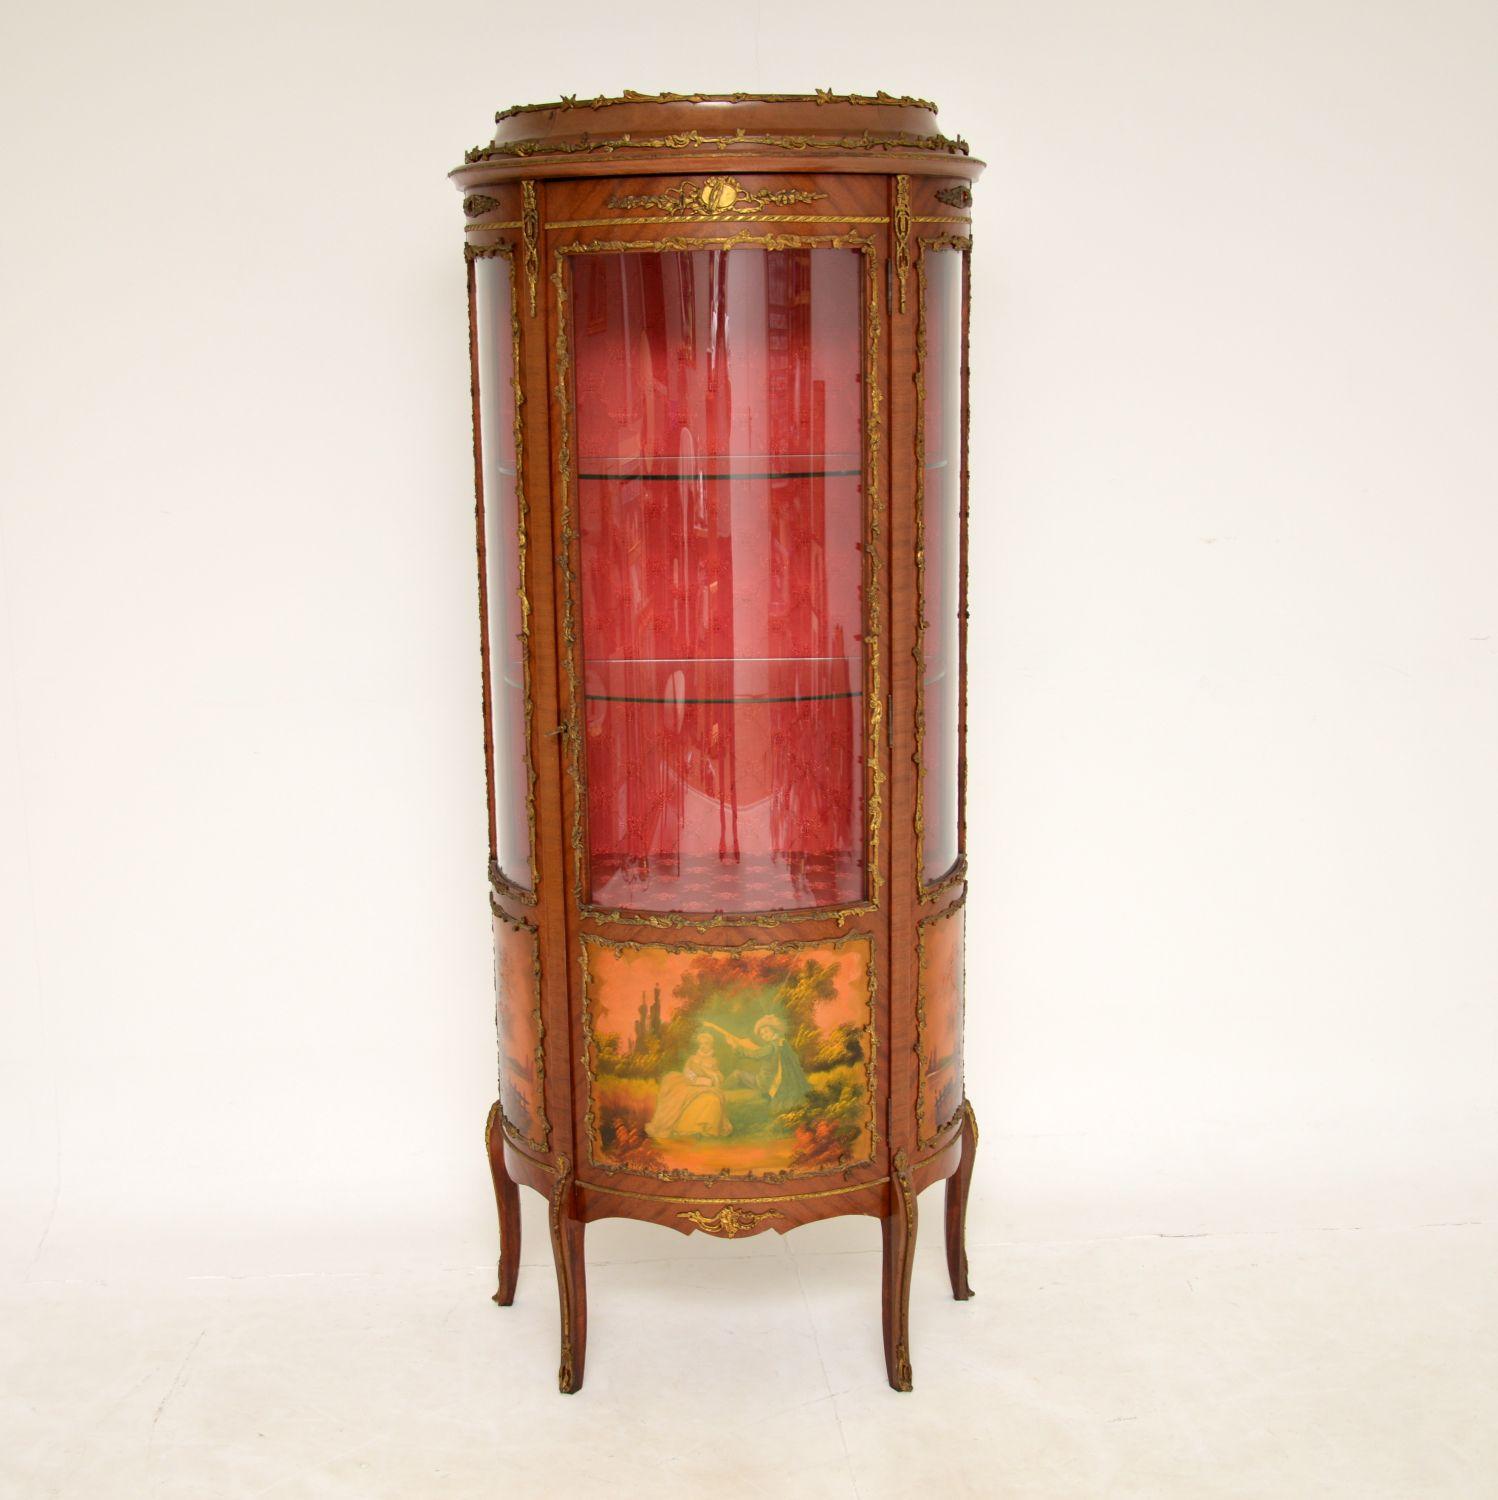 A stunning painted and ormolu mounted antique French style display cabinet, which we would date from around the 1930’s period.
It is of lovely quality, with a finely made curved glass front and sides. The wood has stunning gilt bronze mounts all